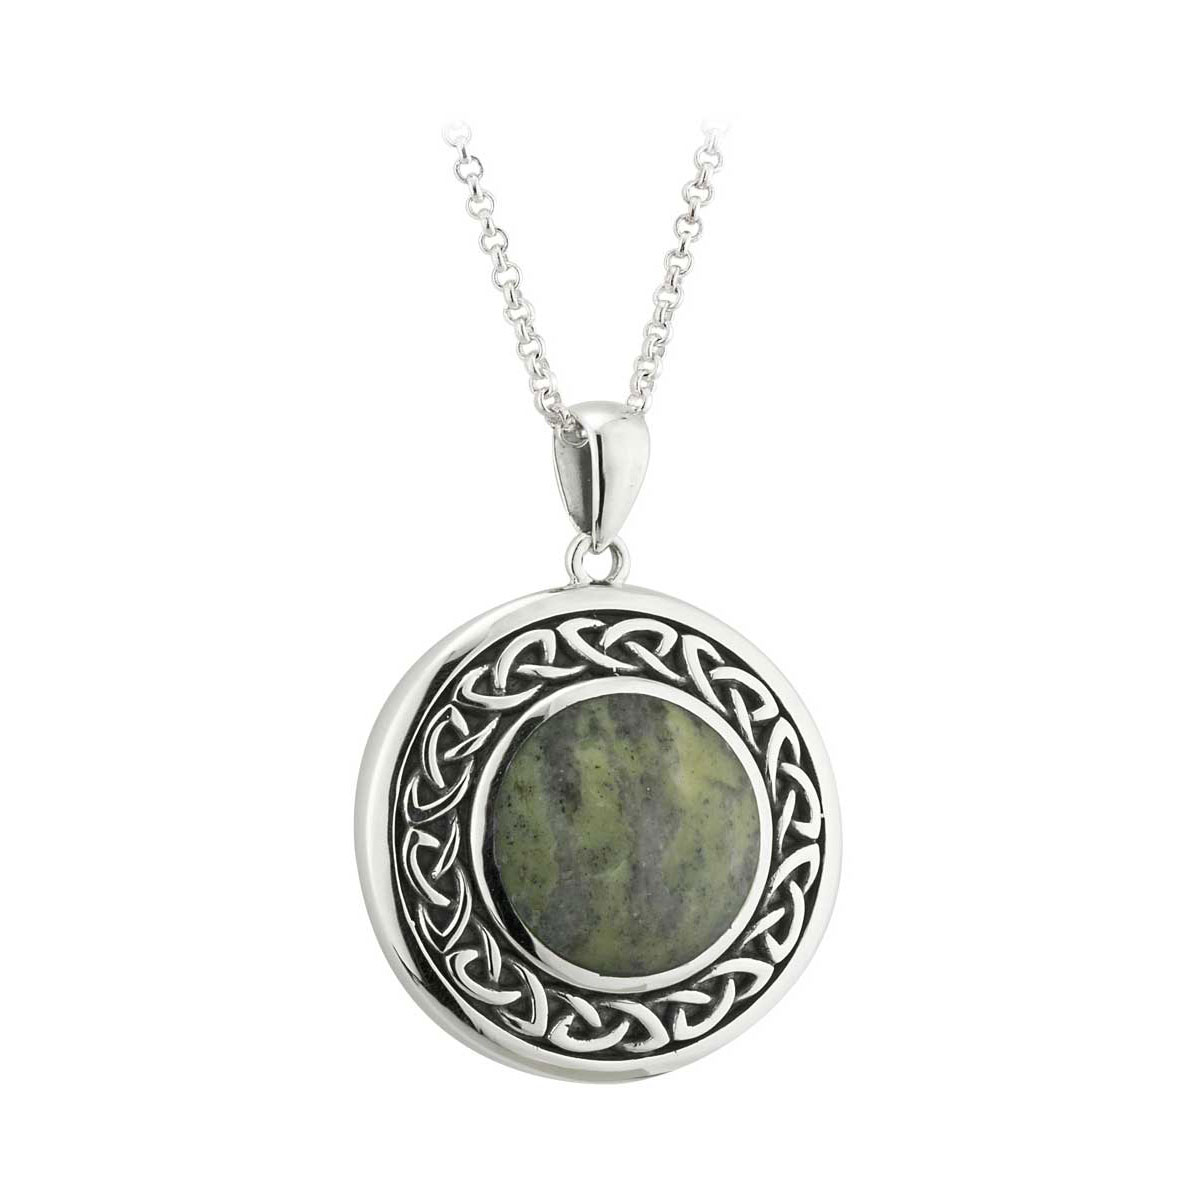 Cashs Ireland, Sterling Silver and Connemara Marble Round Celtic Necklace